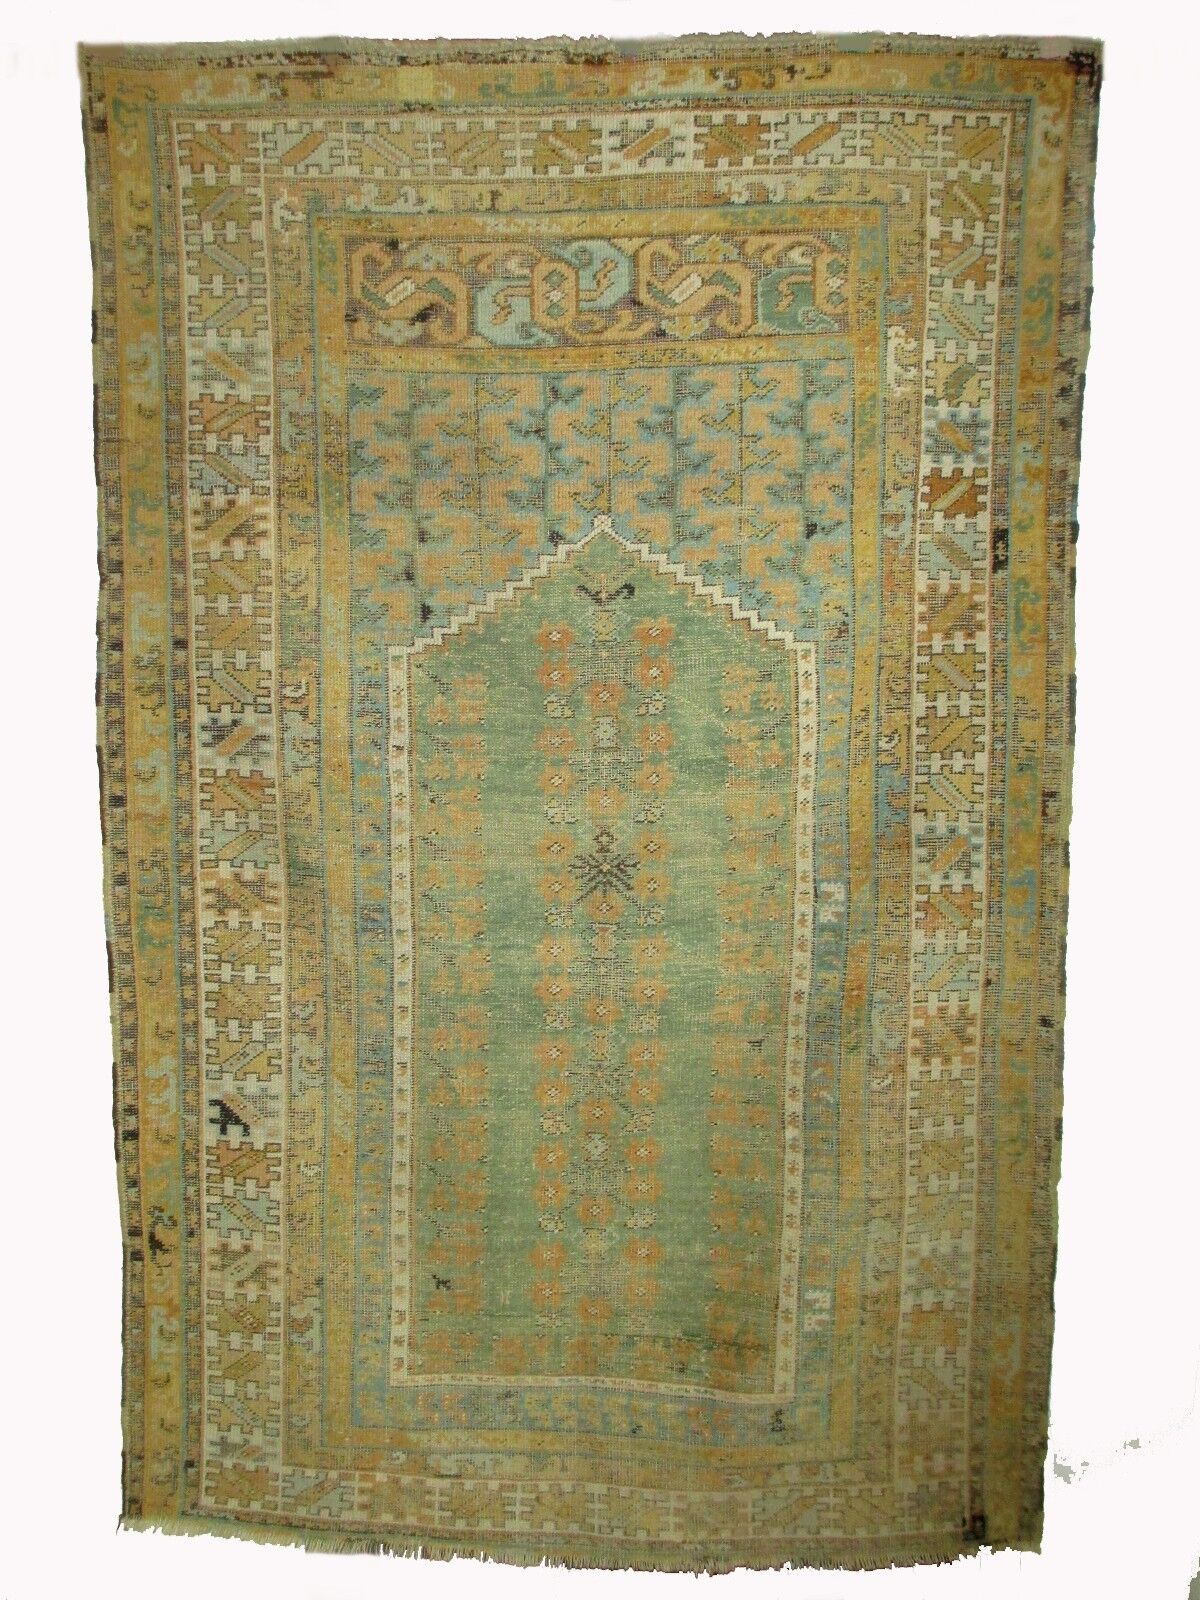 A Good Antique 19th Century Prayer Rug with Muted Tones